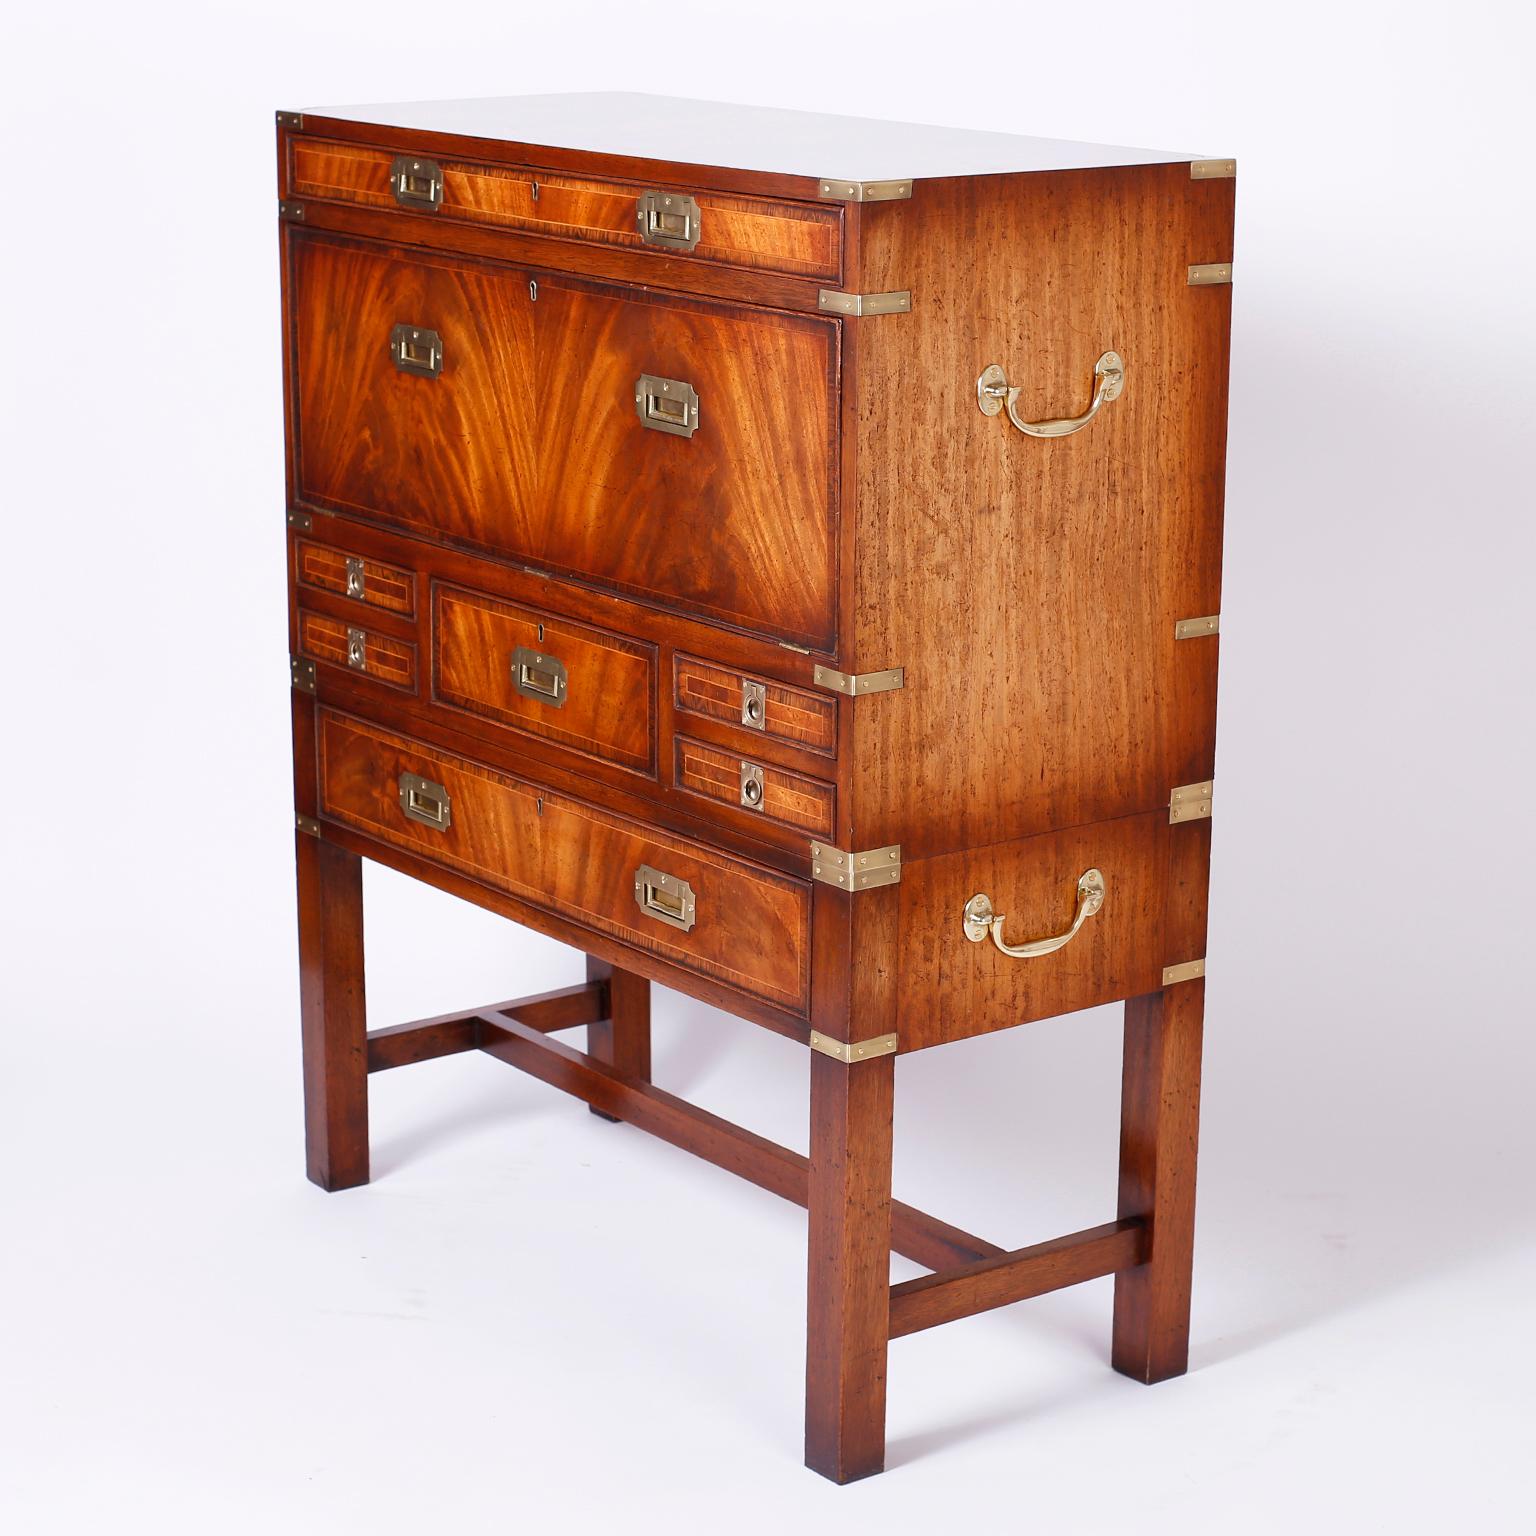 British Colonial English Campaign Secretary Chest on Stand